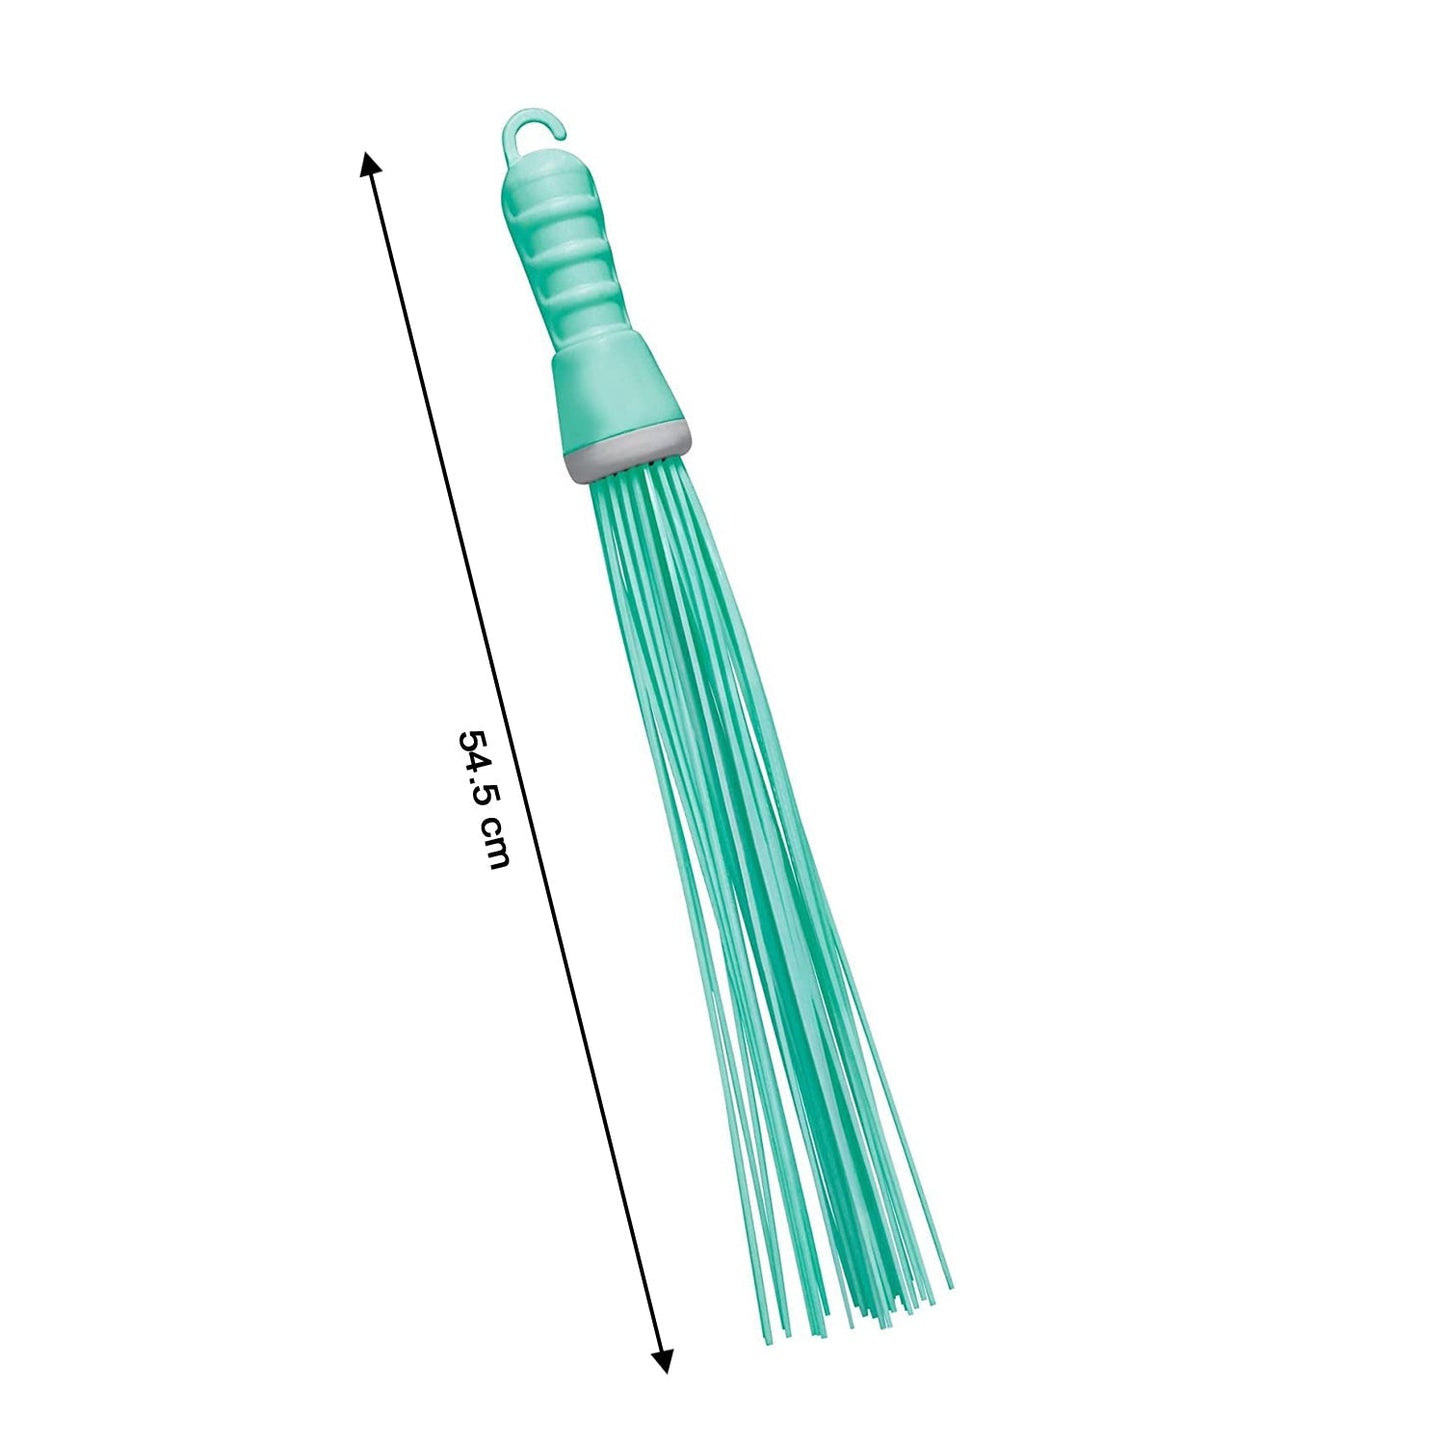 4024 Plastic Hard Bristle Broom for Bathroom Floor Cleaning and Scrubbing, Wet and Dry Floor Cleaning Dukandaily